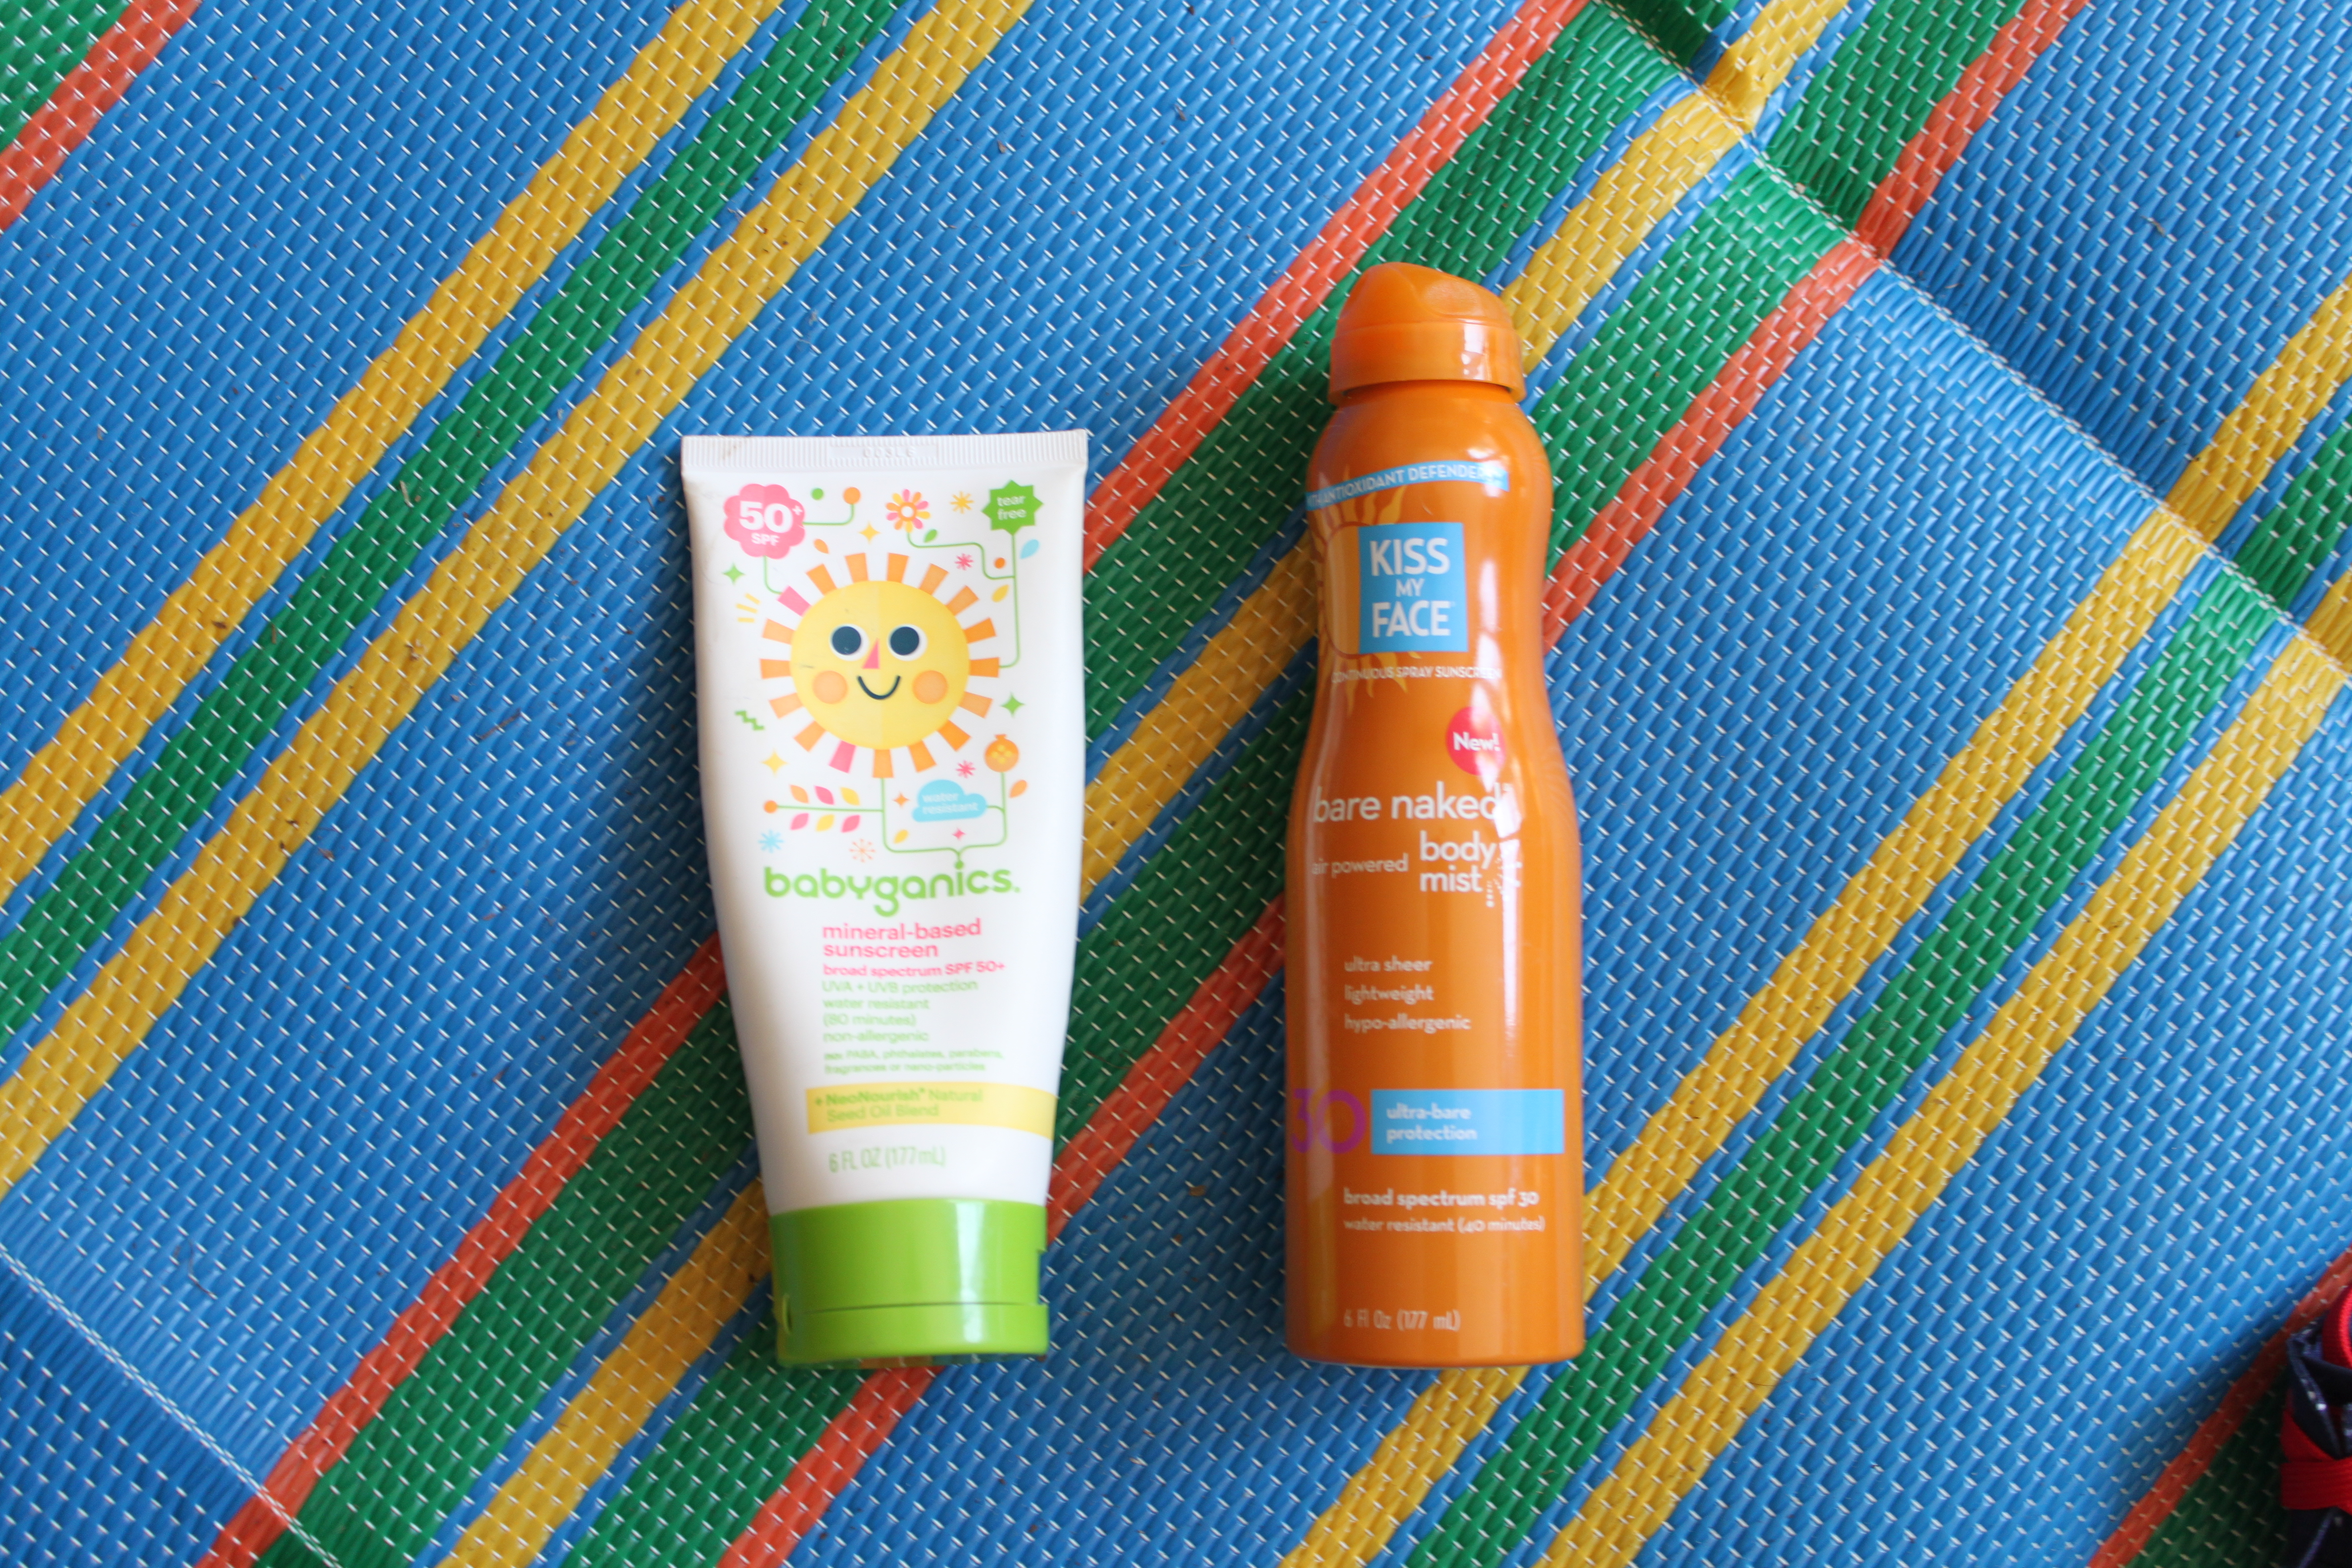 summer essentials for mom and toddler for parks, beach, and pool. Sunscreen, skin and hair products. Kiss the Face Sunscreen and Babyganics